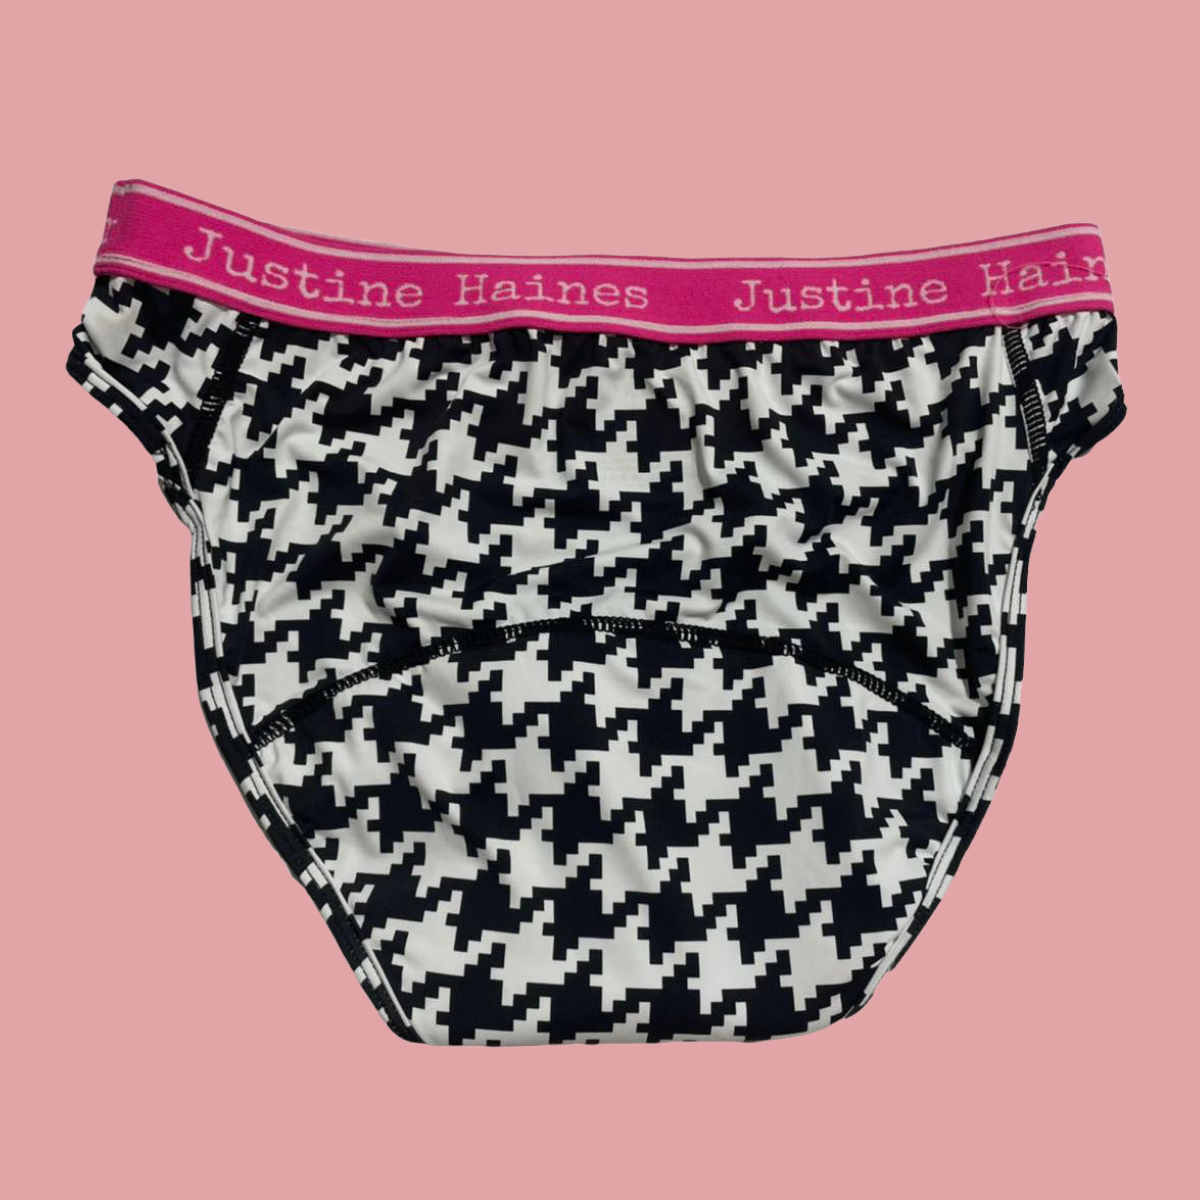 https://www.justinehaines.com/products/adorable-low-rise-fashion-print-period-panties-in-black-white-herringbone